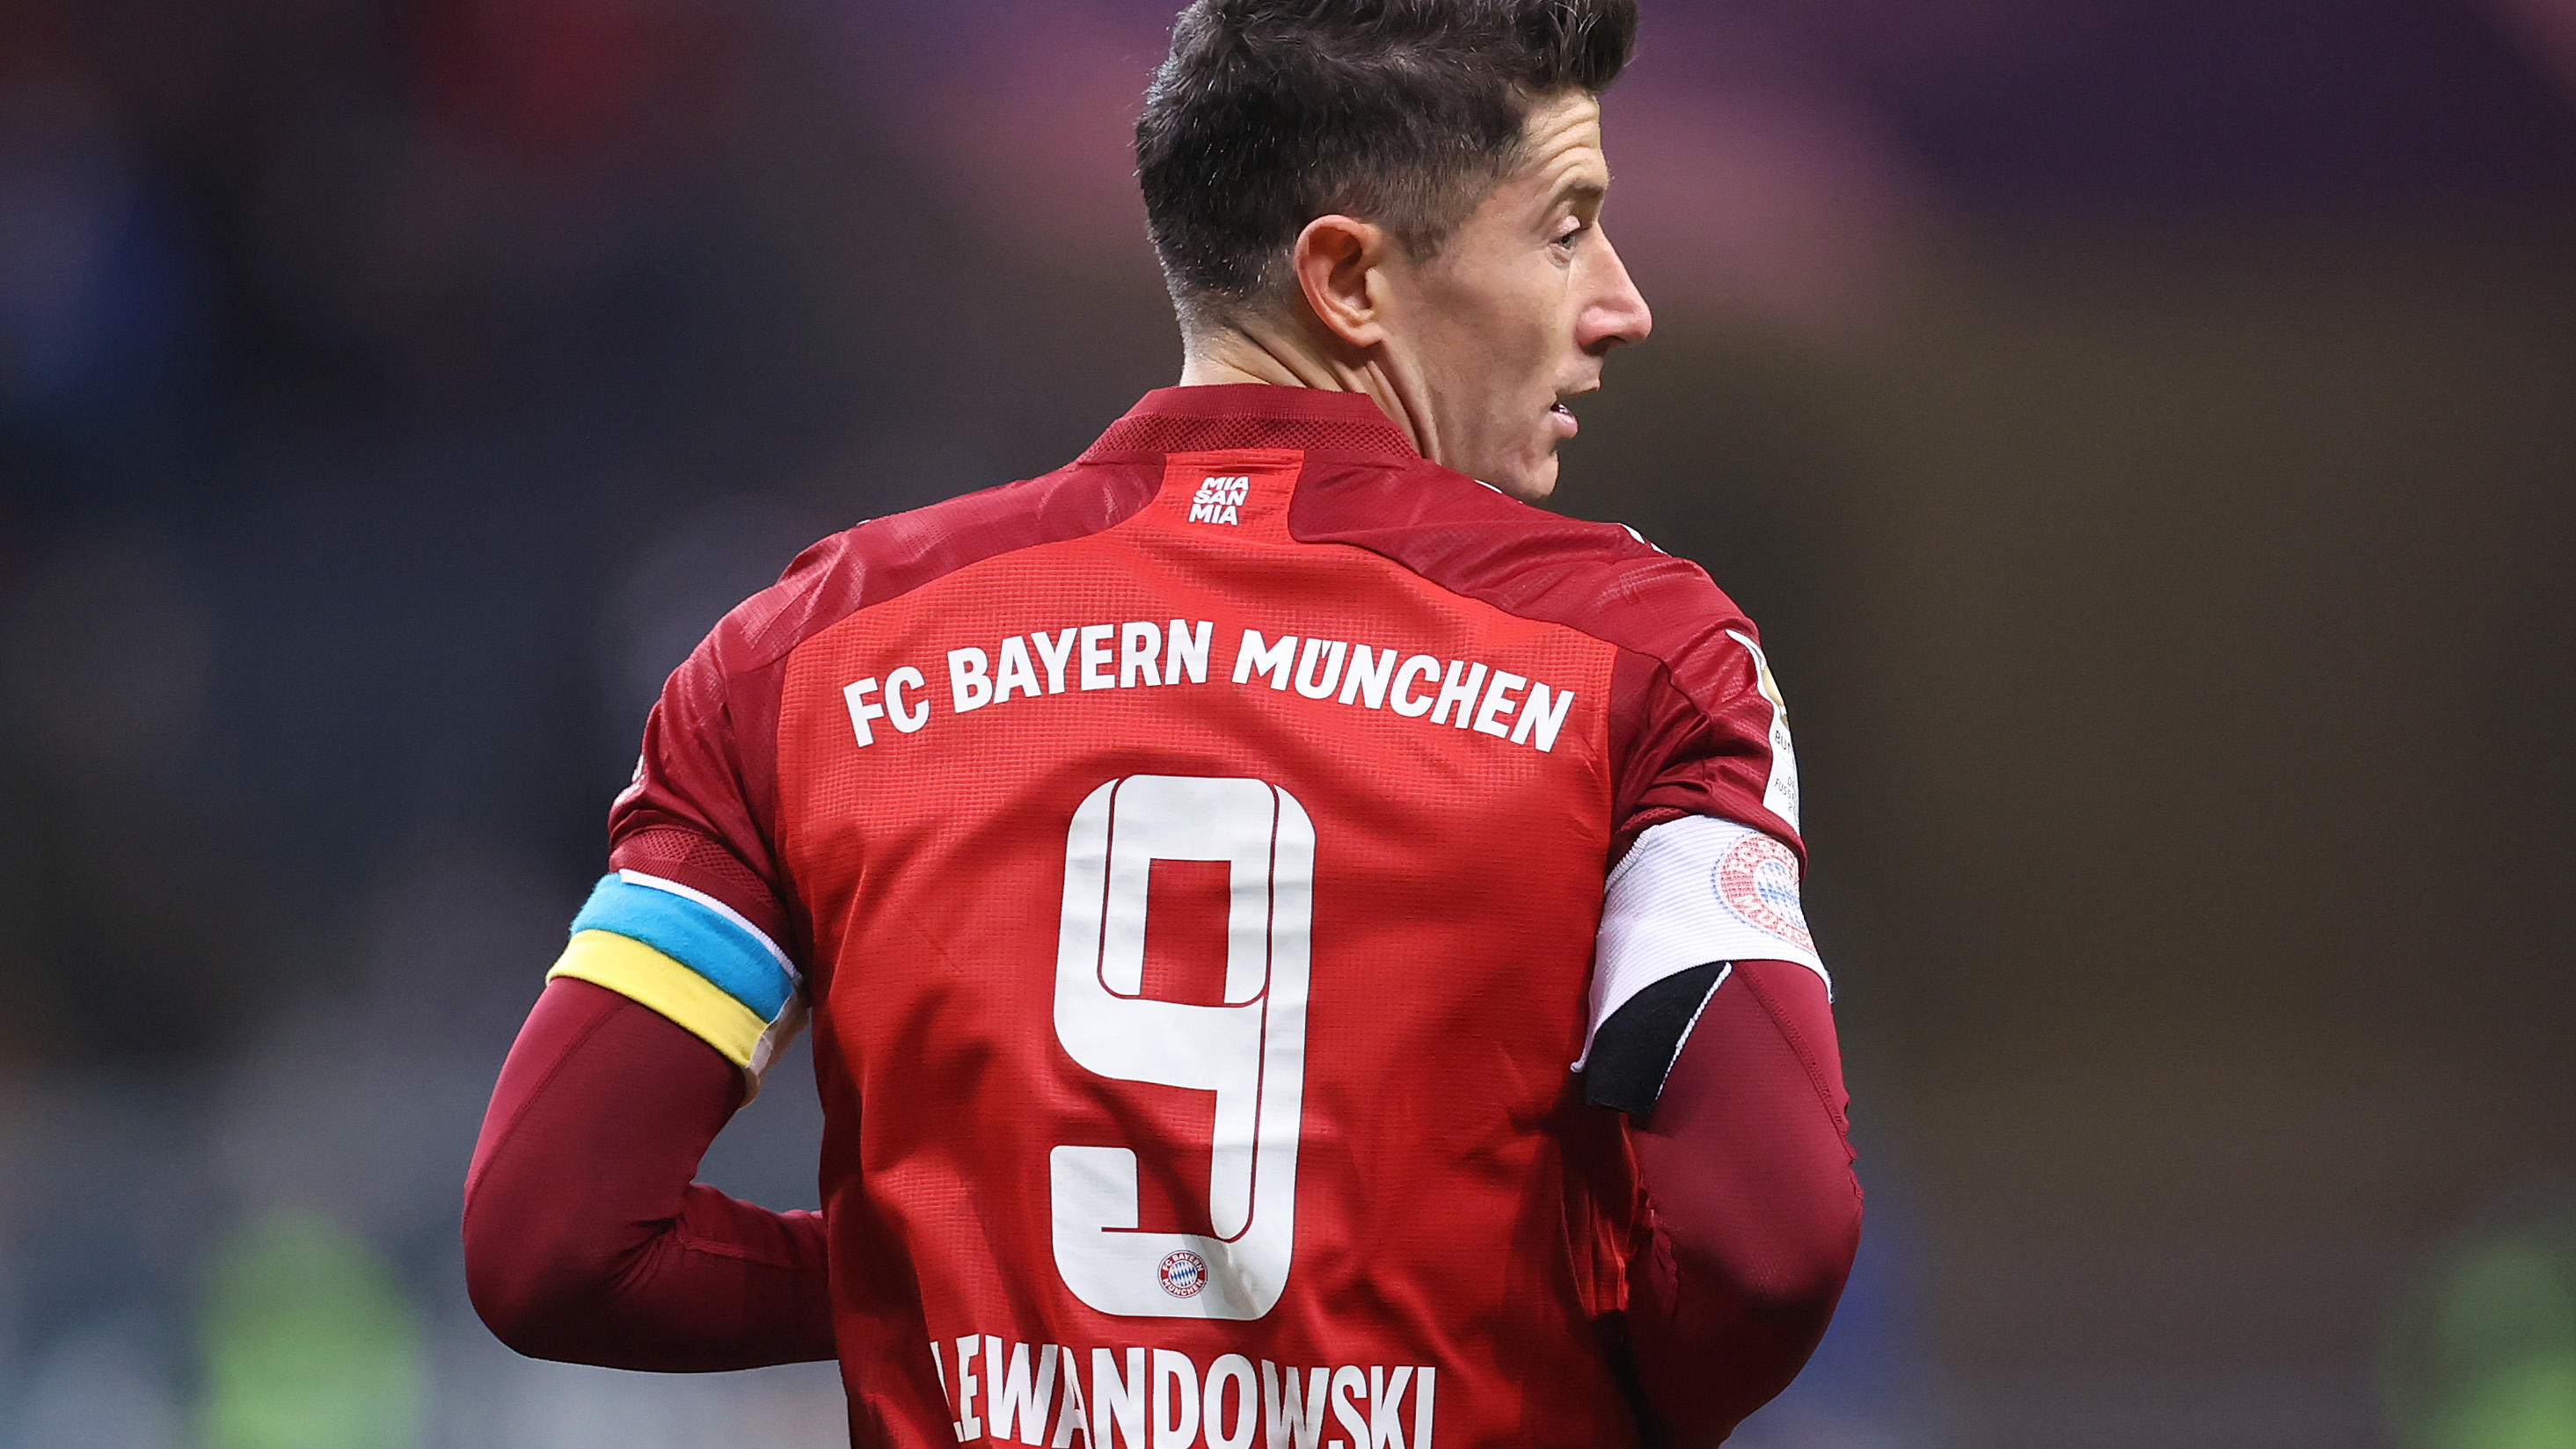 FRANKFURT AM MAIN, GERMANY - FEBRUARY 26: Robert Lewandowski of FC Bayern Muenchen wears and armband in the colours of the Ukraine flag during the Bundesliga match between Eintracht Frankfurt and FC Bayern MÃ¼nchen at Deutsche Bank Park on February 2